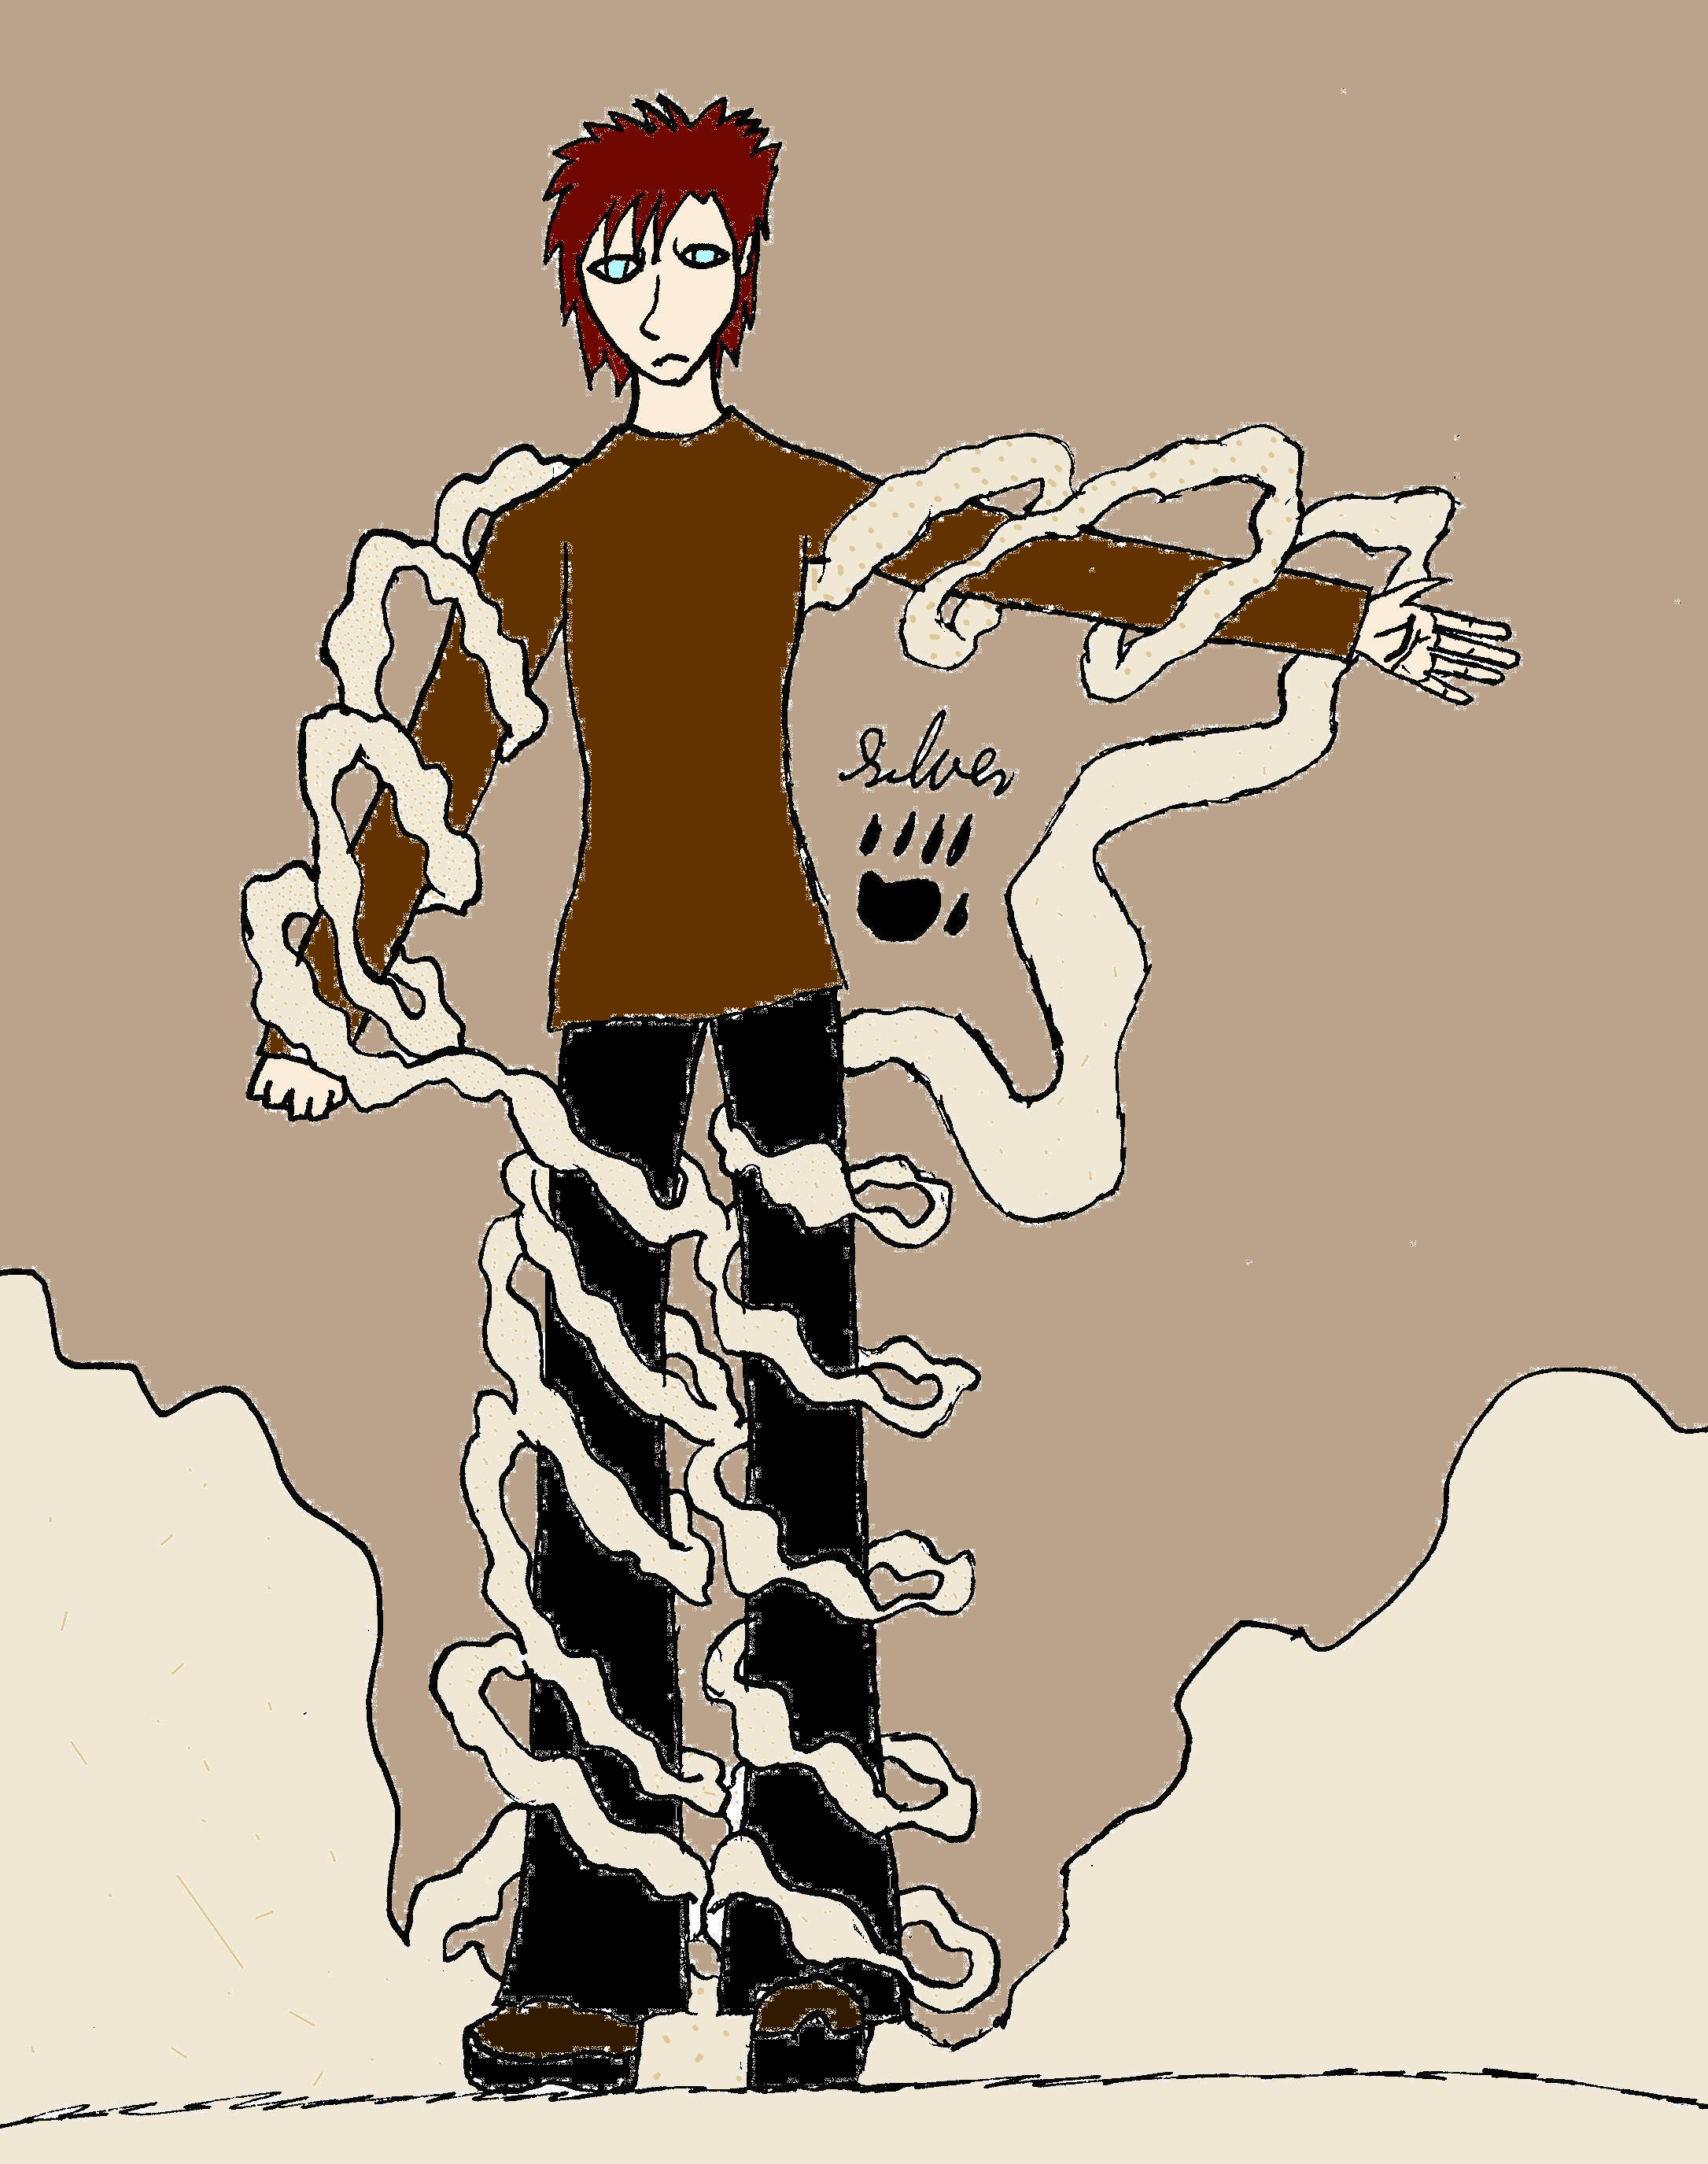 Gaara of the Sand by silver_the_wolf